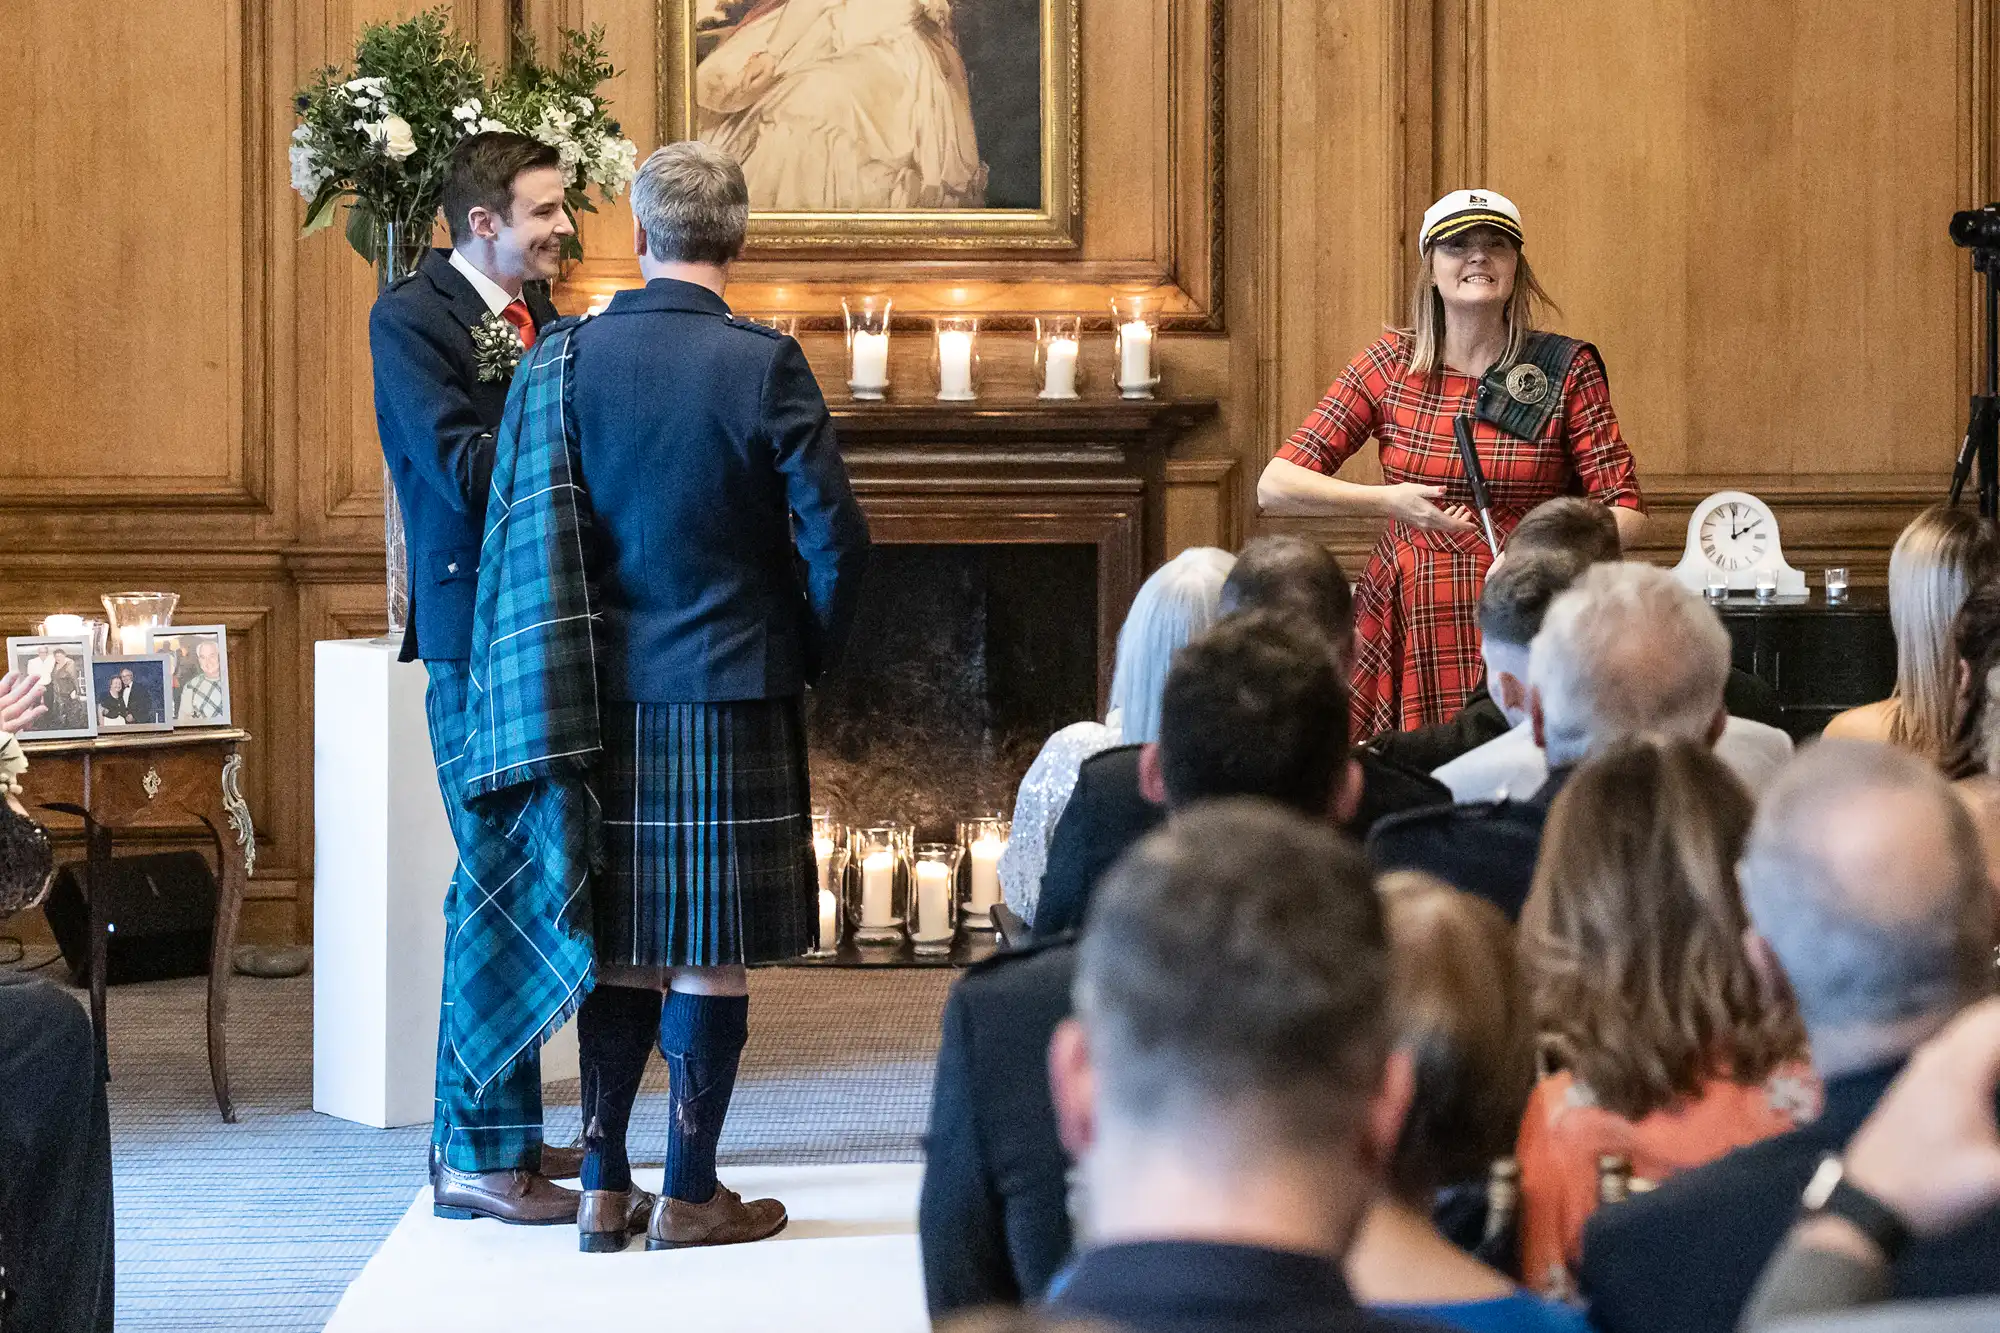 A wedding officiant in a tartan dress and cap stands before a couple, one in a kilt and the other in a suit, as they face each other during their ceremony in a wood-paneled room.